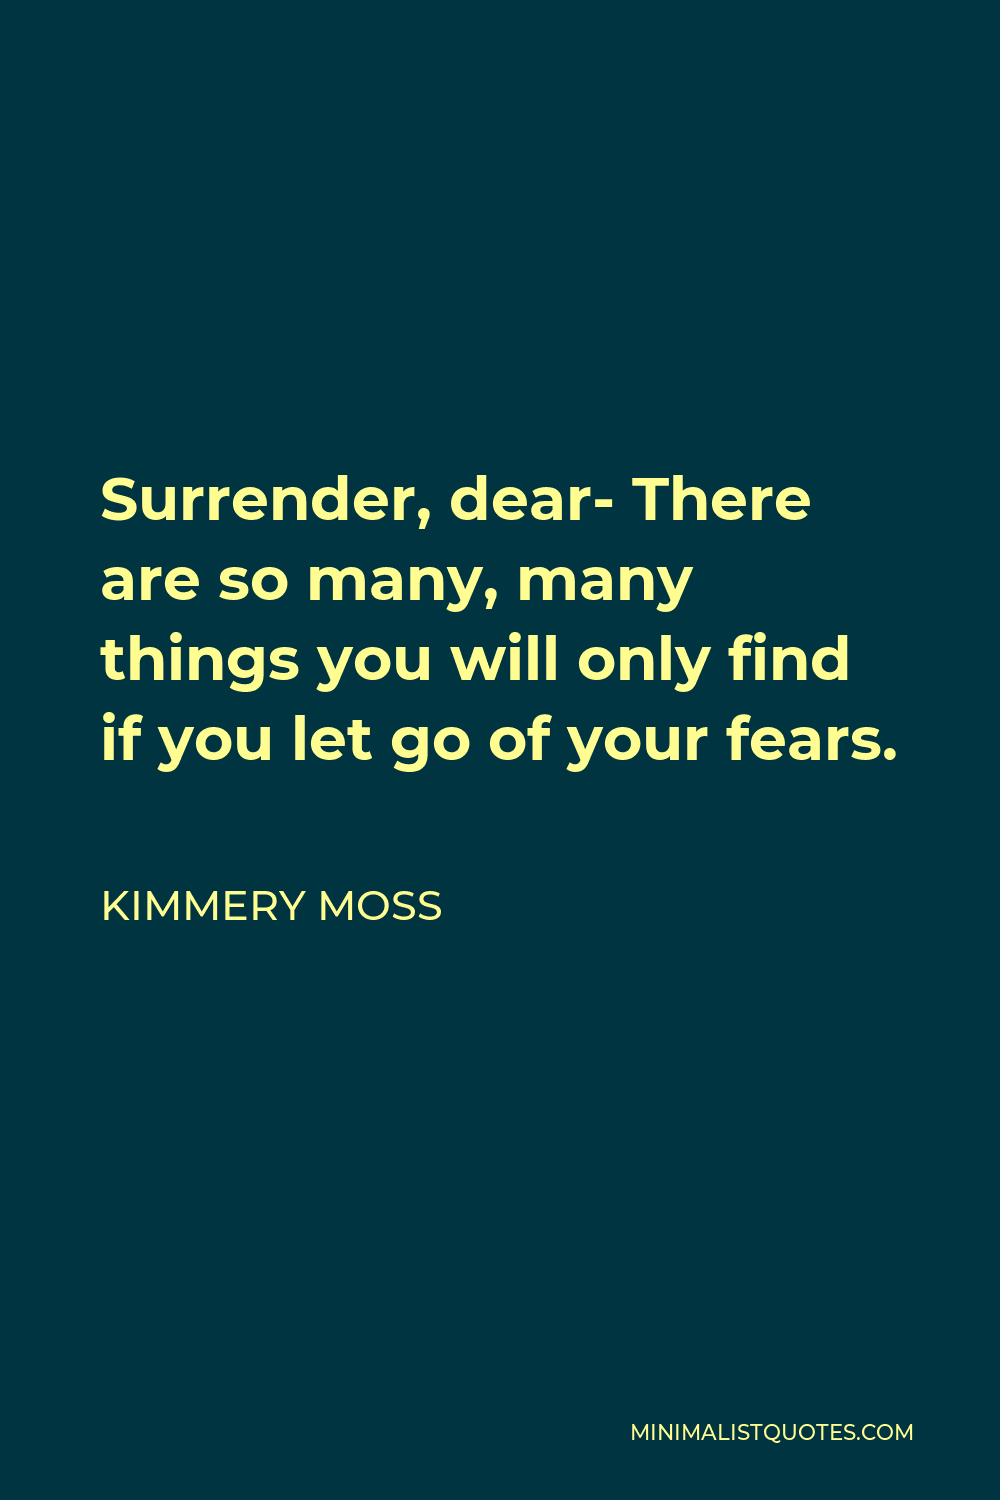 Kimmery Moss Quote - Surrender, dear- There are so many, many things you will only find if you let go of your fears.